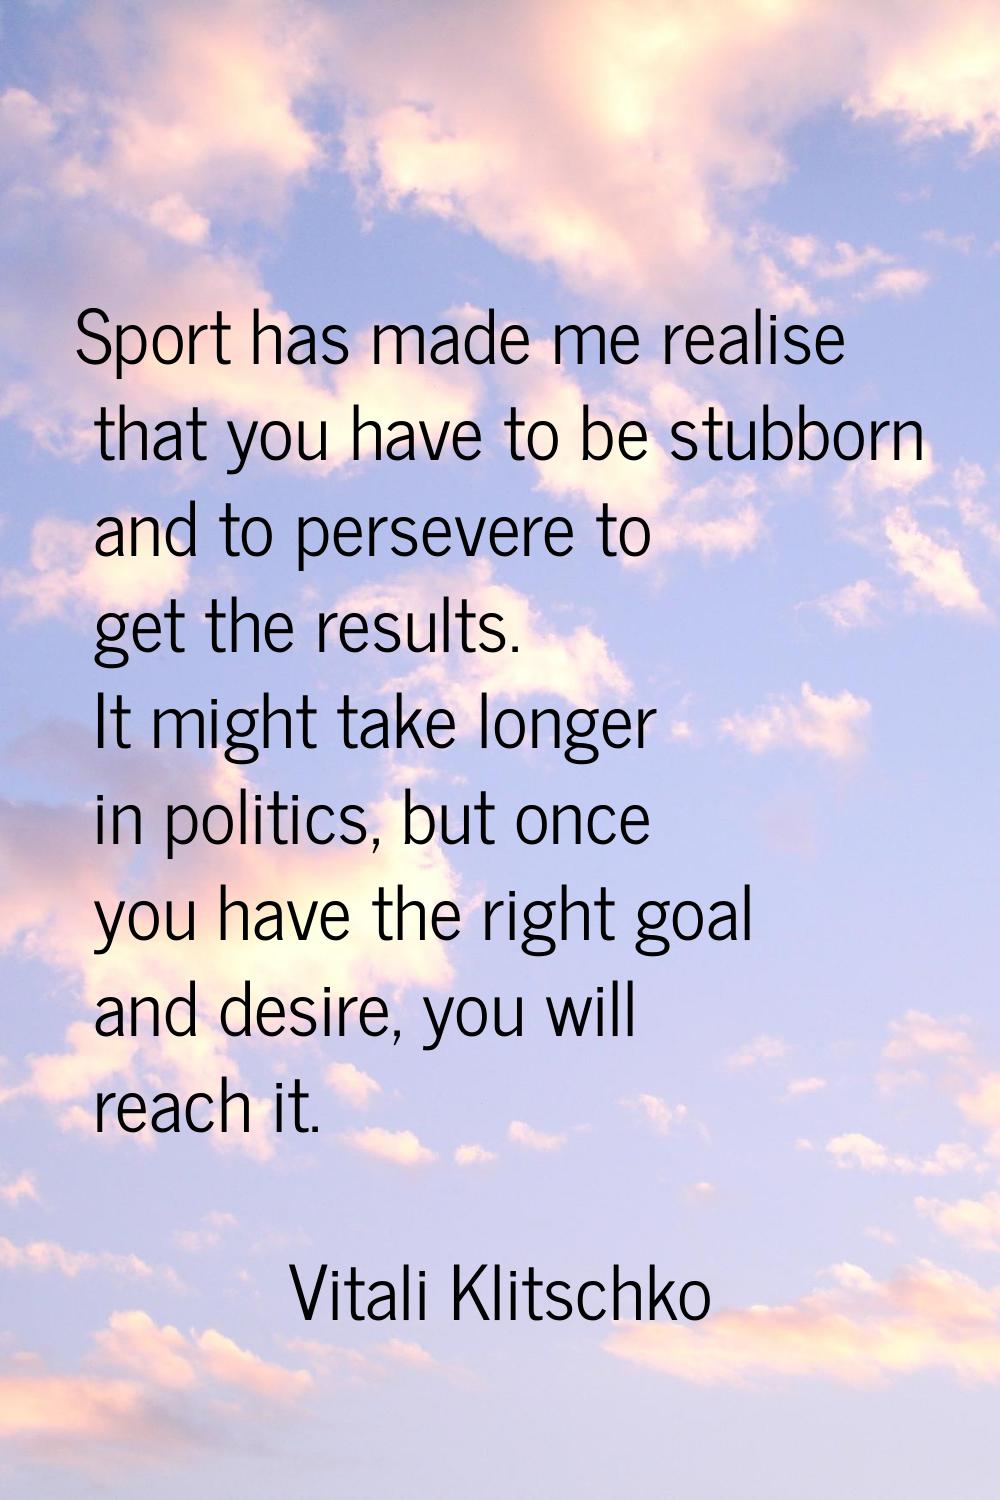 Sport has made me realise that you have to be stubborn and to persevere to get the results. It migh